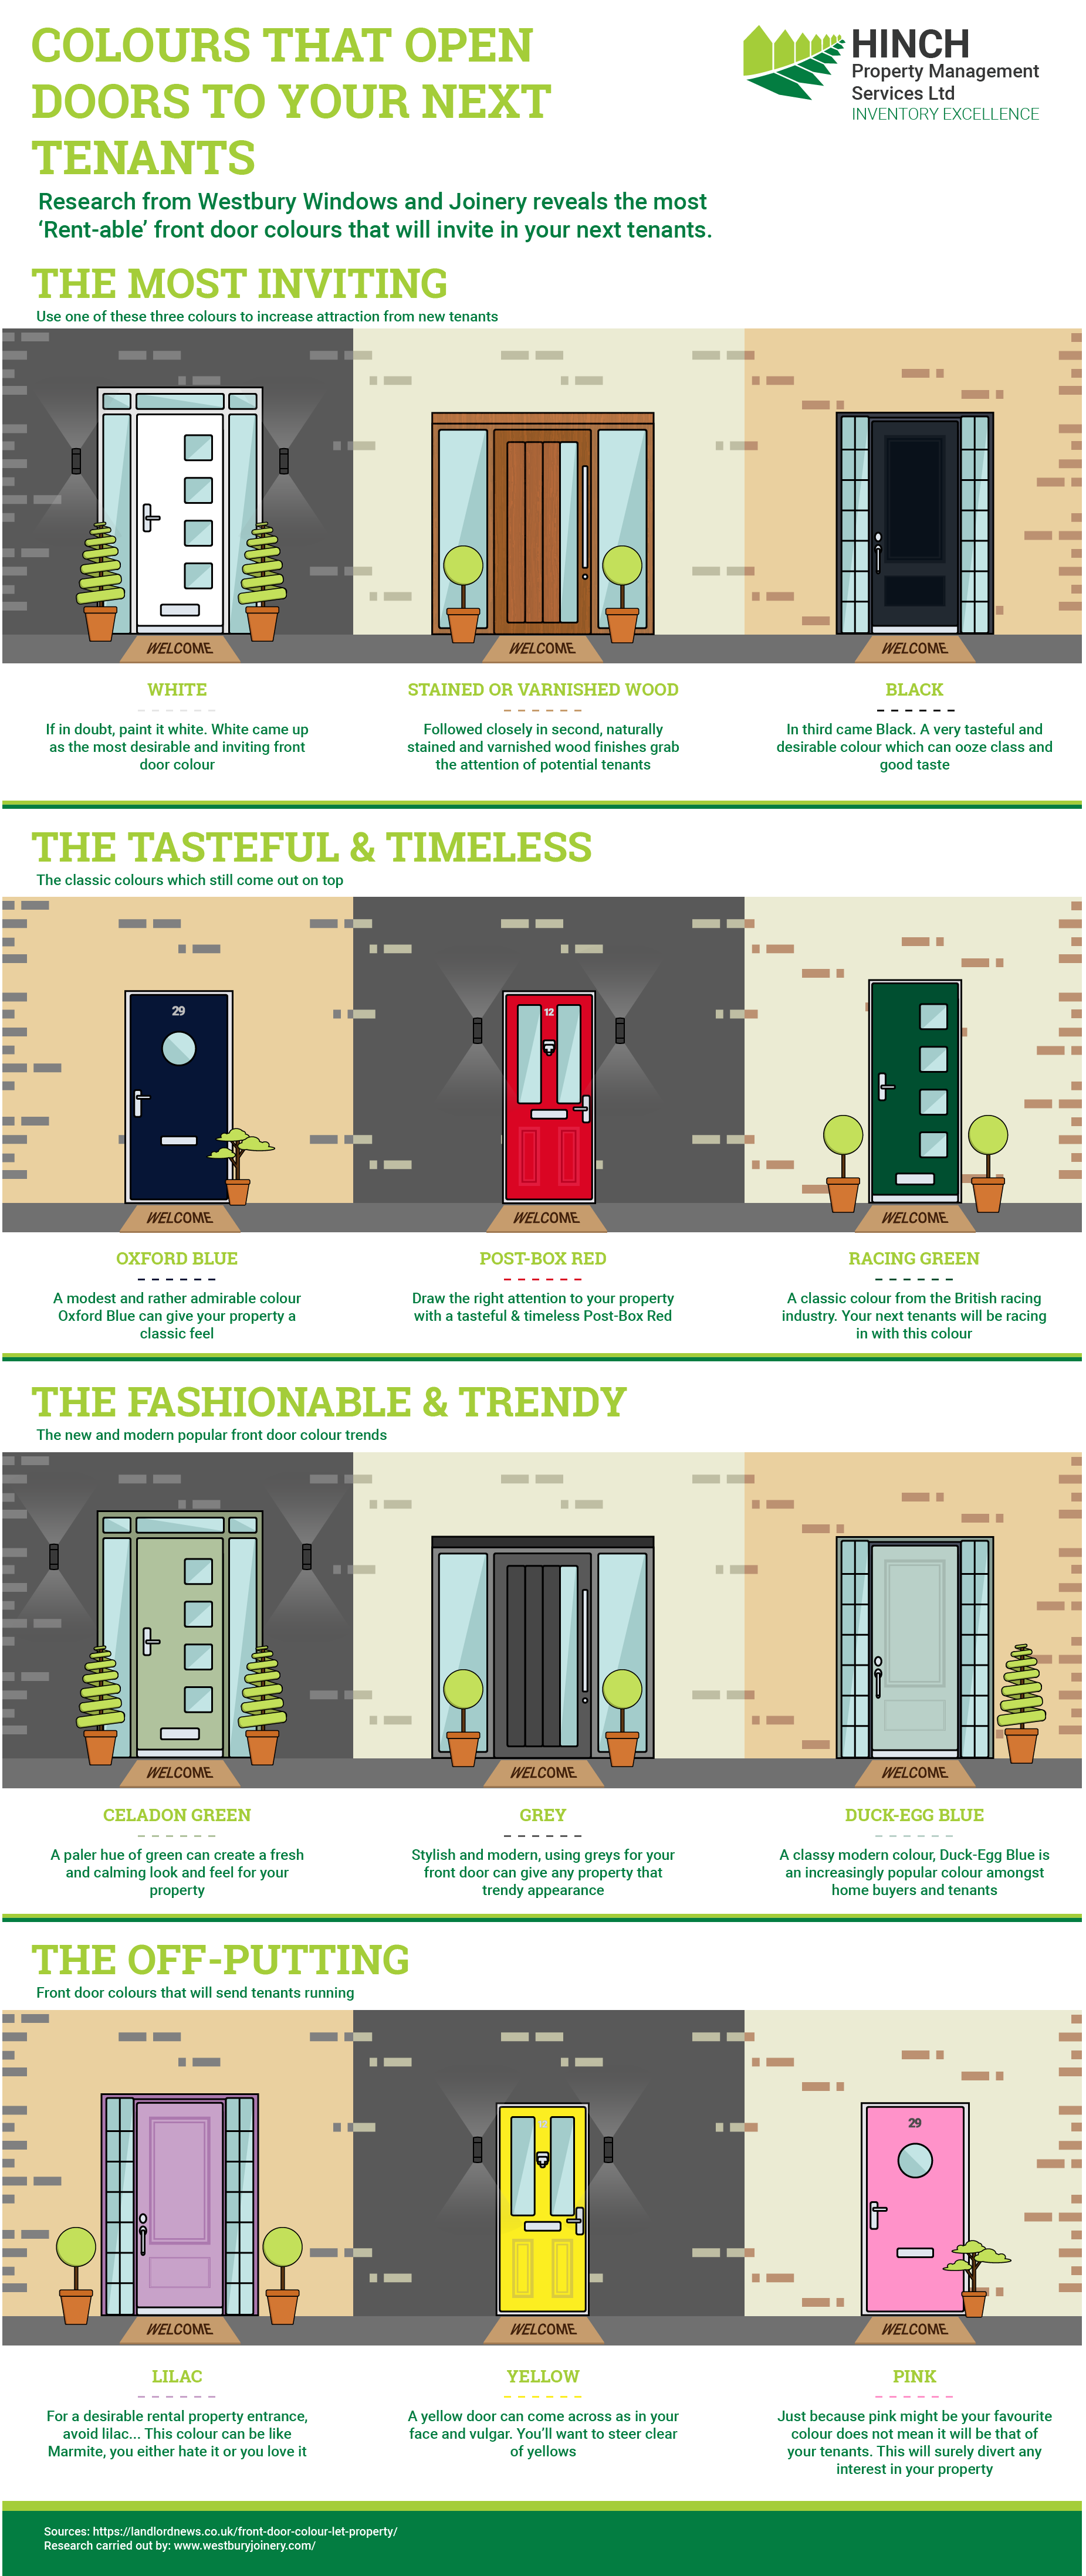 The most desirable front door colours